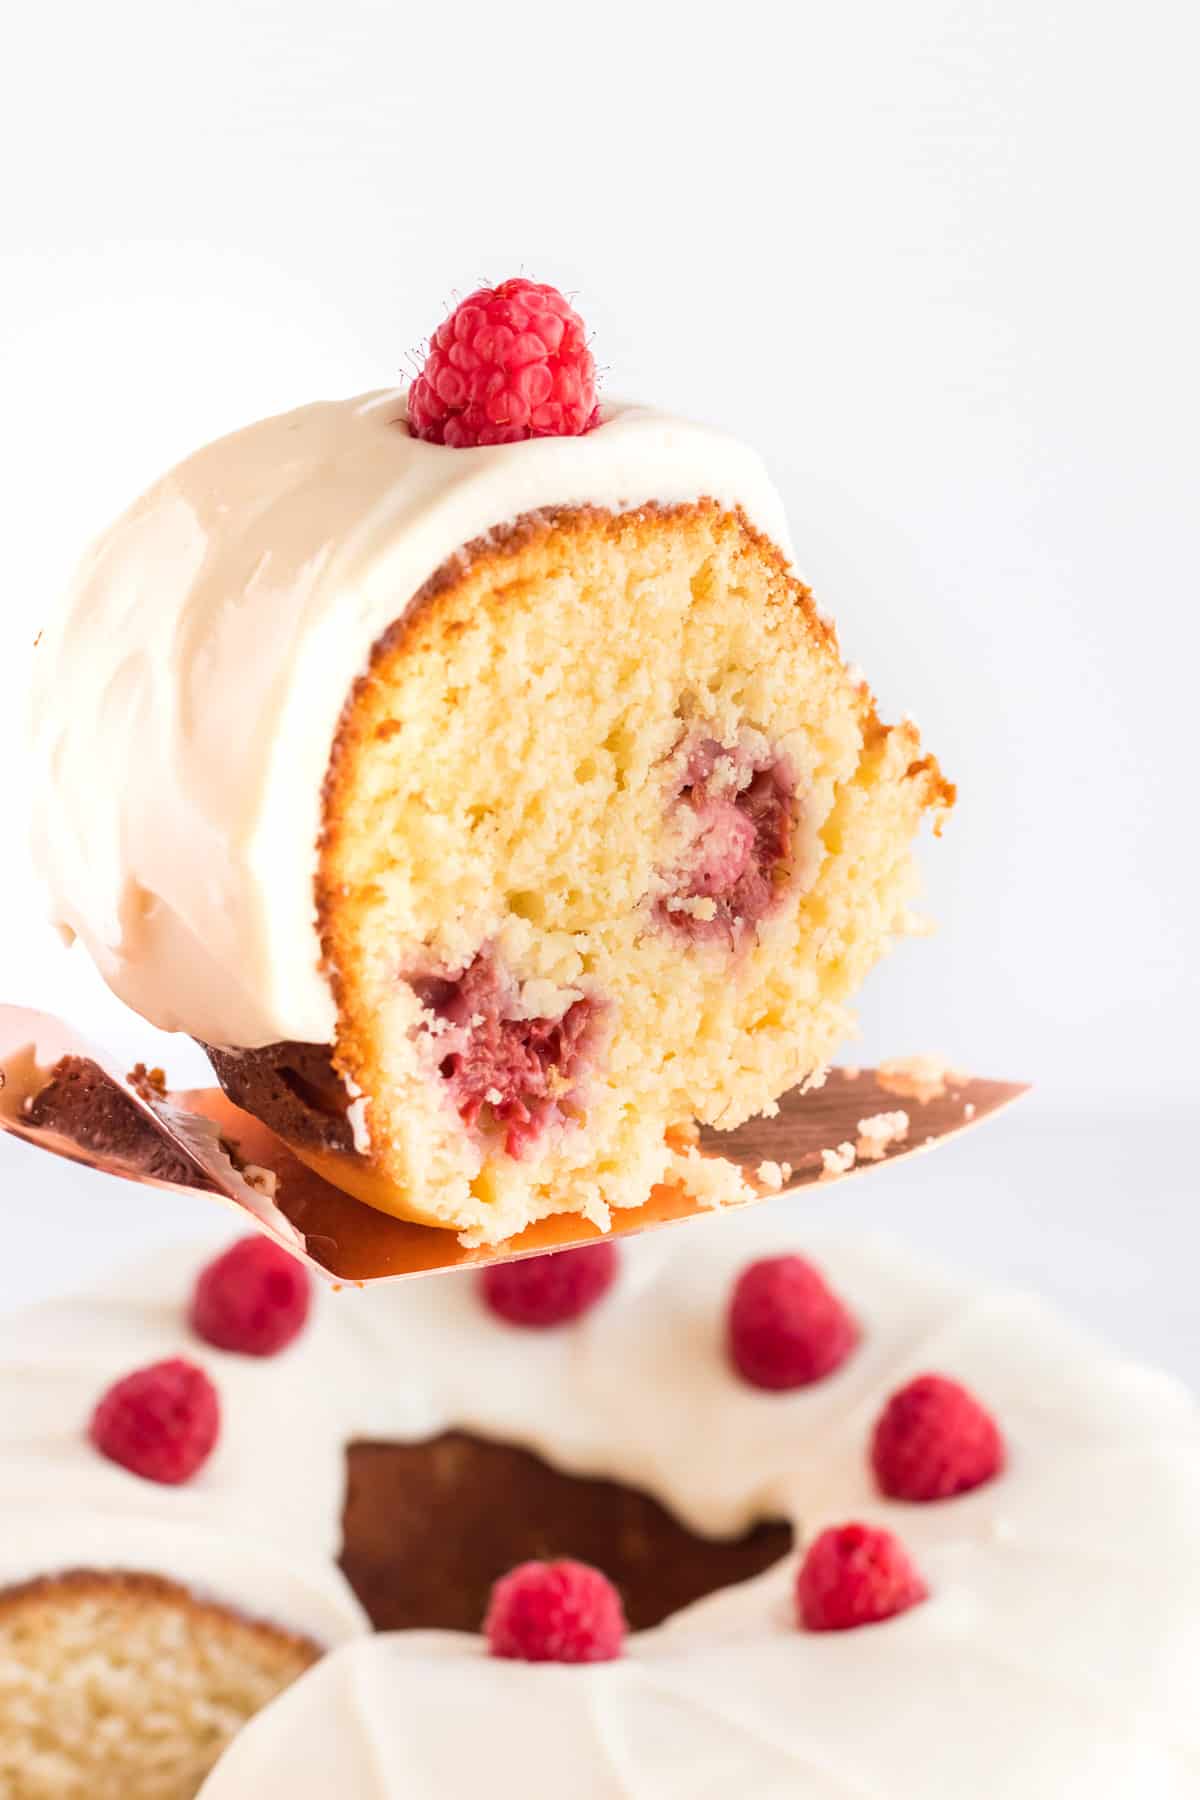 A slice of the Bundt cake is lifted with a spatula.